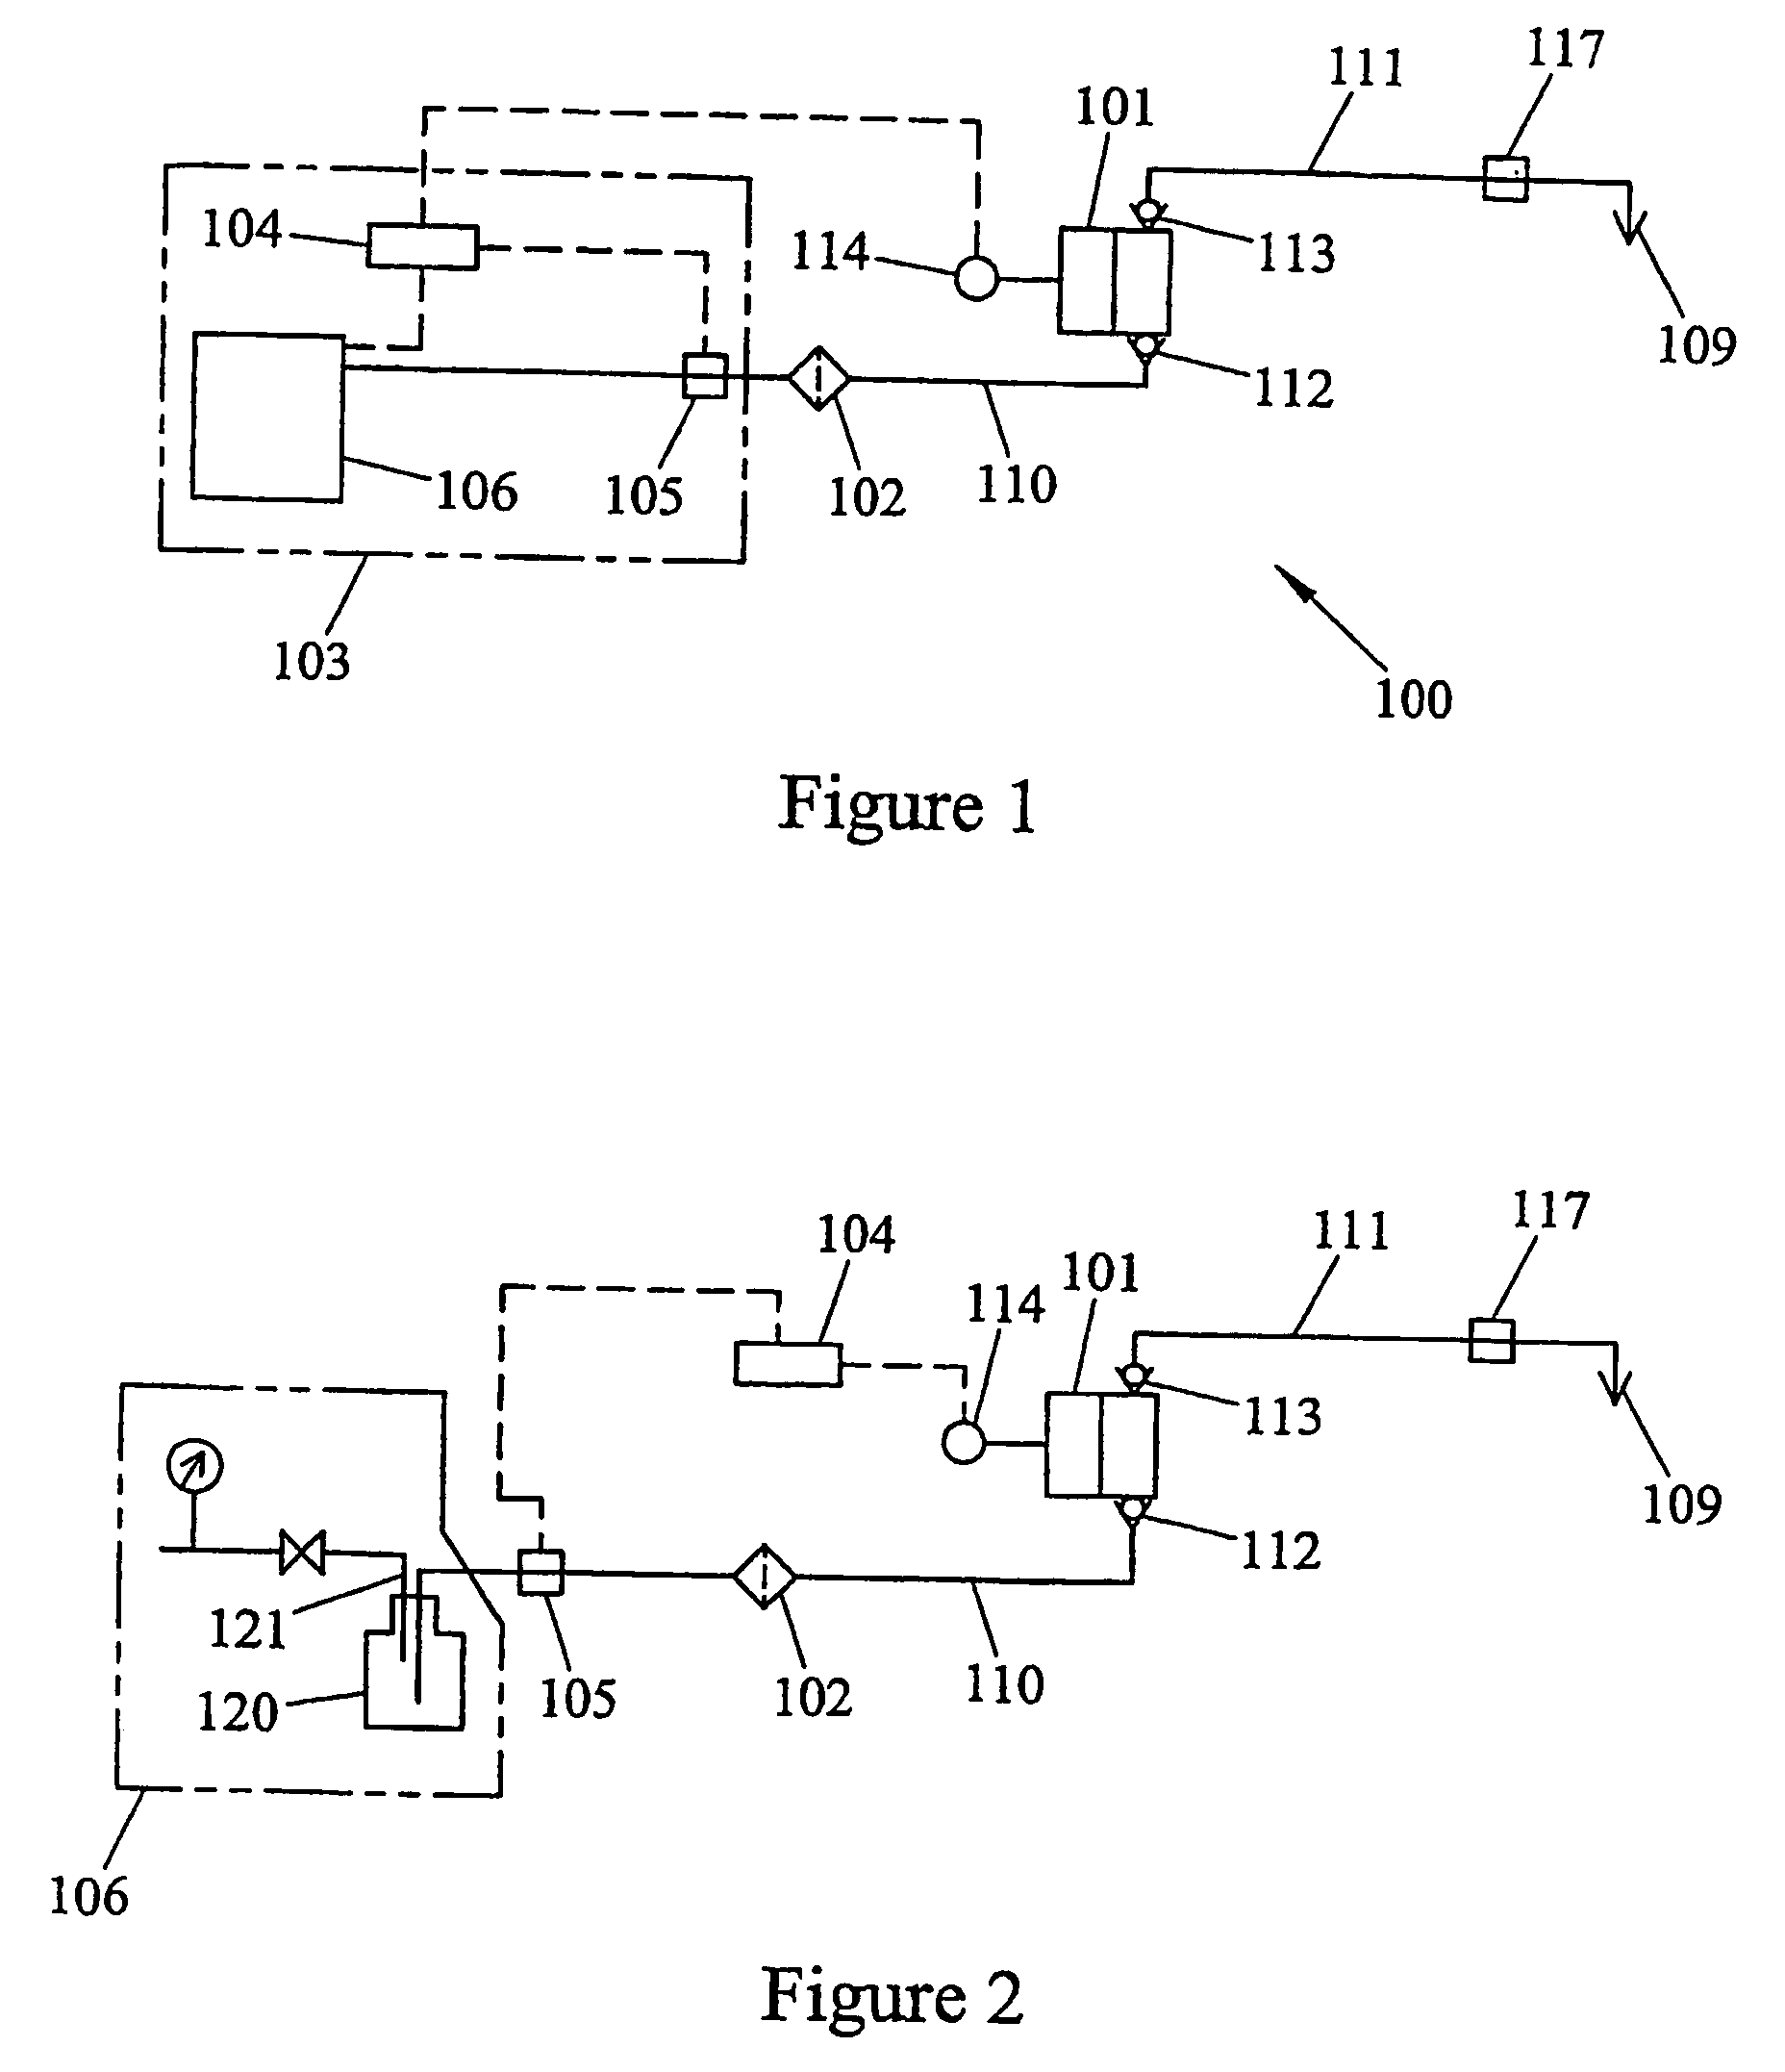 Liquids dispensing systems and methods